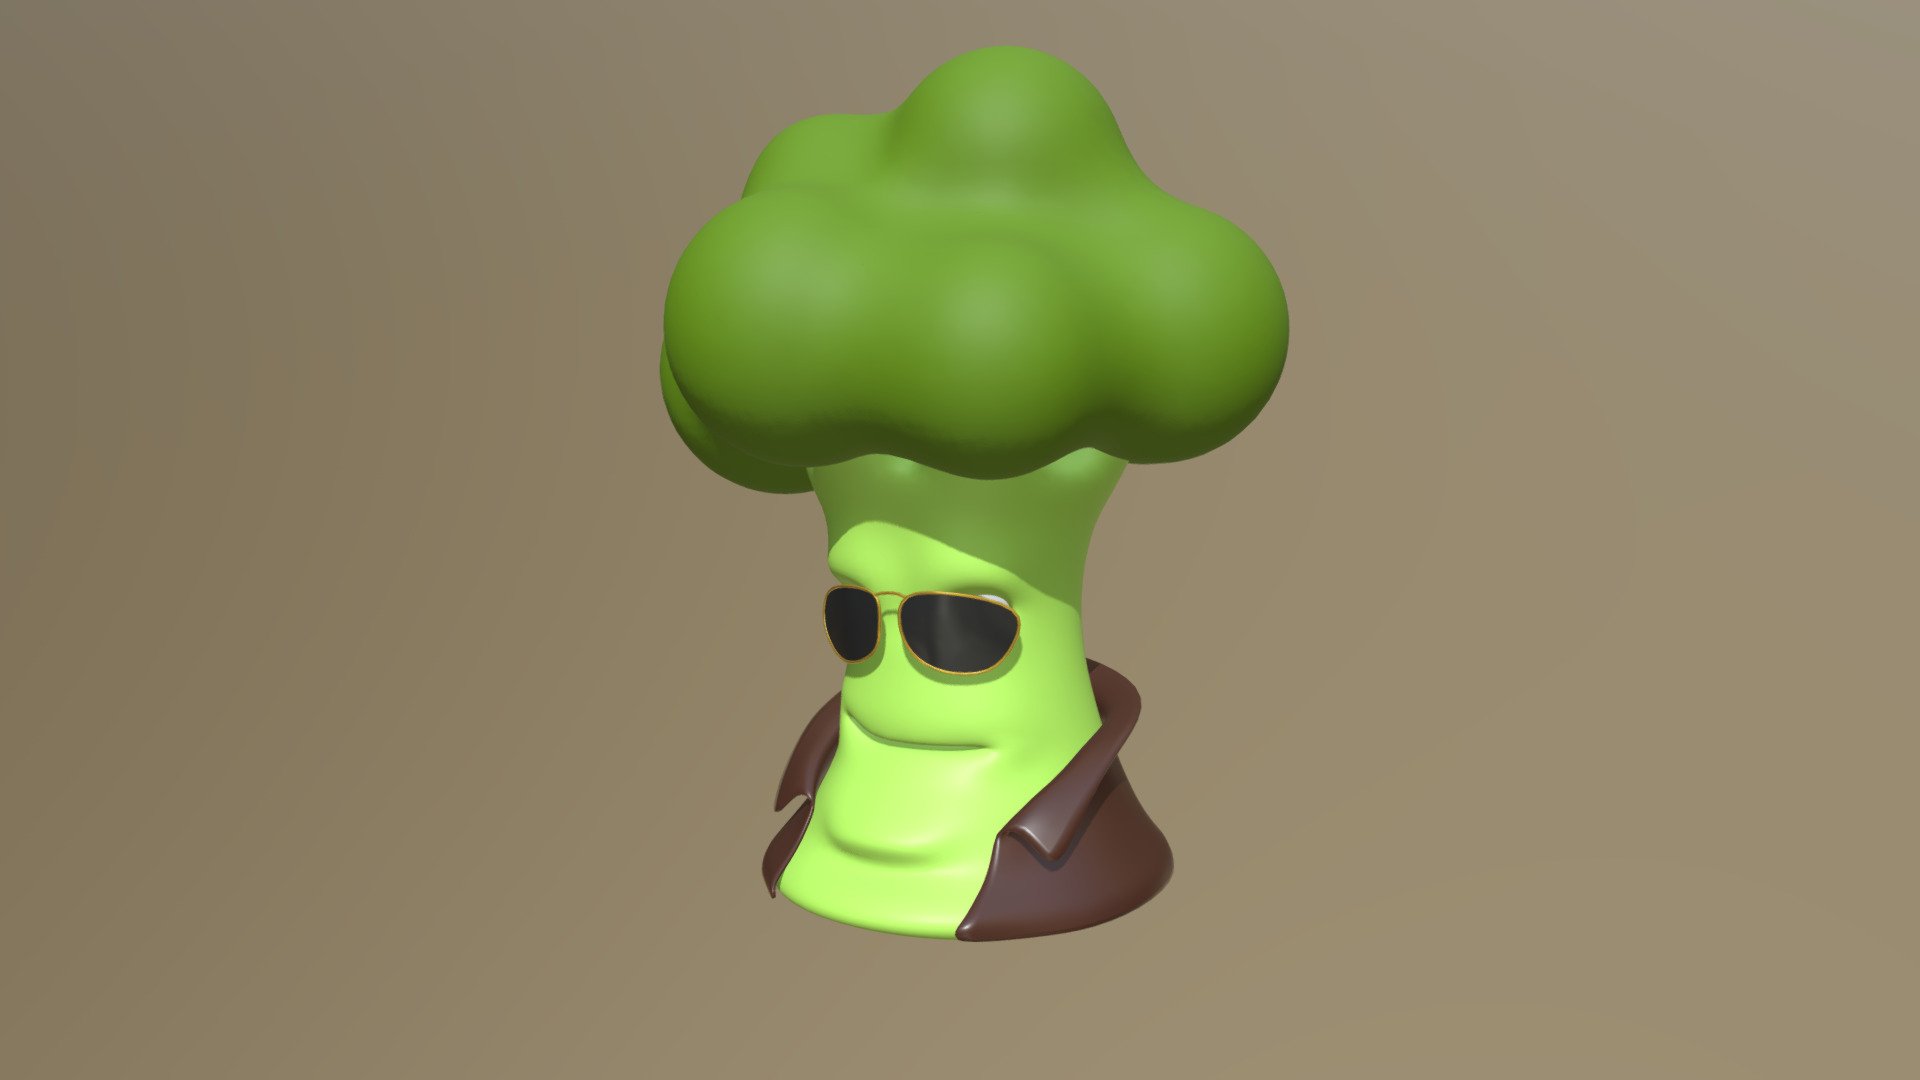 &hellip;more like broCOOLi, amrite?
Play the animation for ultimate swag. 

A simple cartoon broccoli character made for #DiscordFoodCharacter challenge. Features a looped bobing and wiggling animation. 
I considered trying the wiggle bones addon, but decided against it because I didn't know if they would bake/upload. So, I did everything by hand with weights and transforms and the result looks pretty&hellip; interesting. A bit overcooked probably.

Made with Blender 2.92. Eye texture based on several Pexels photos 3d model